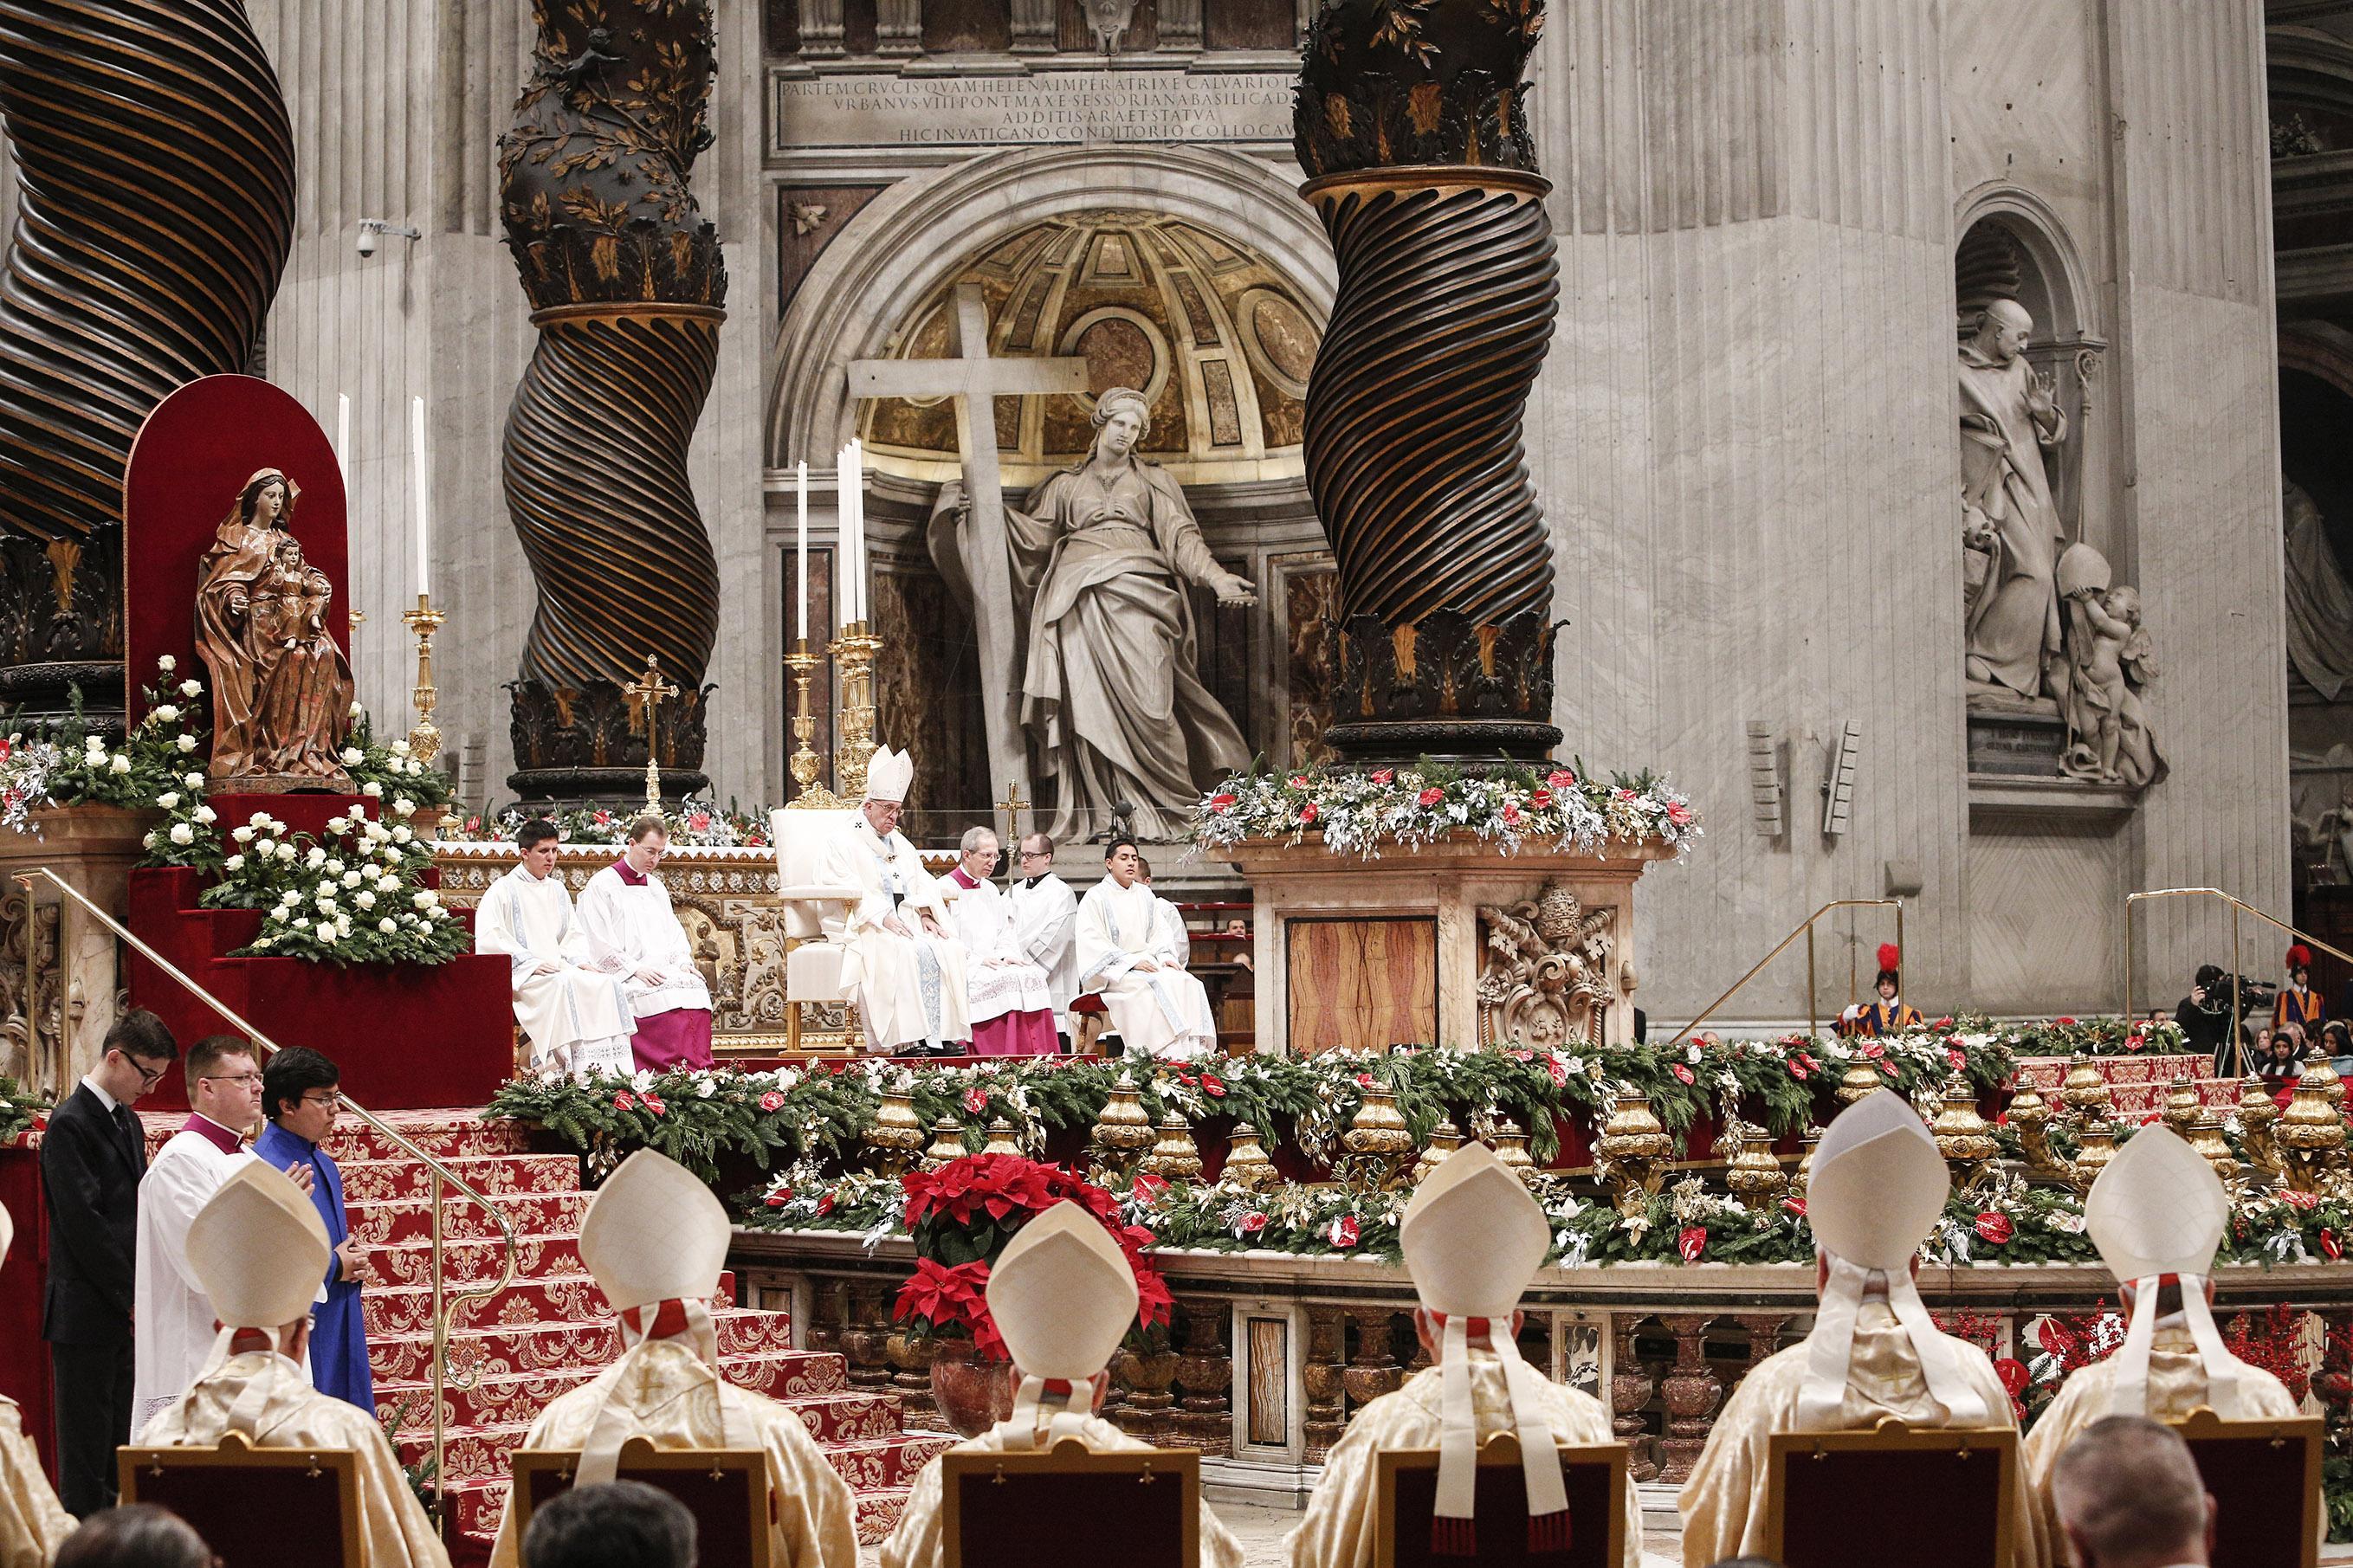 Pope Francis celebrates the solemnity of Mary the Mother of God mass and the celebration of the 49th World Day of Peace in Saint Peter's Basilica